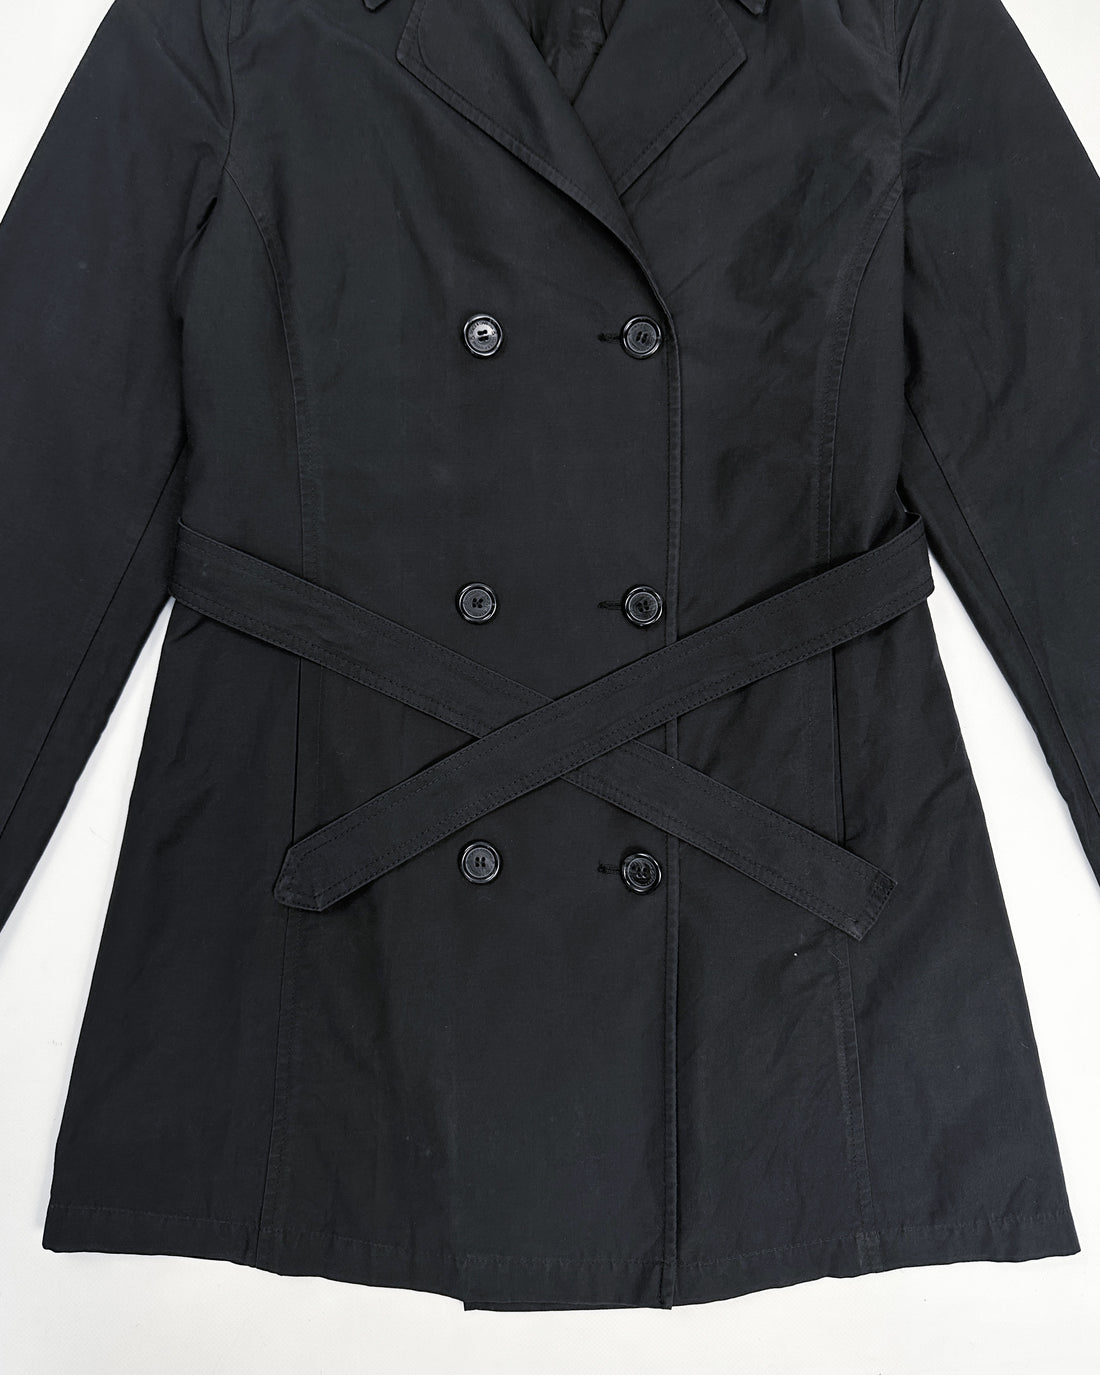 Dolce & Gabbana Black Belted Trench Coat 2000's